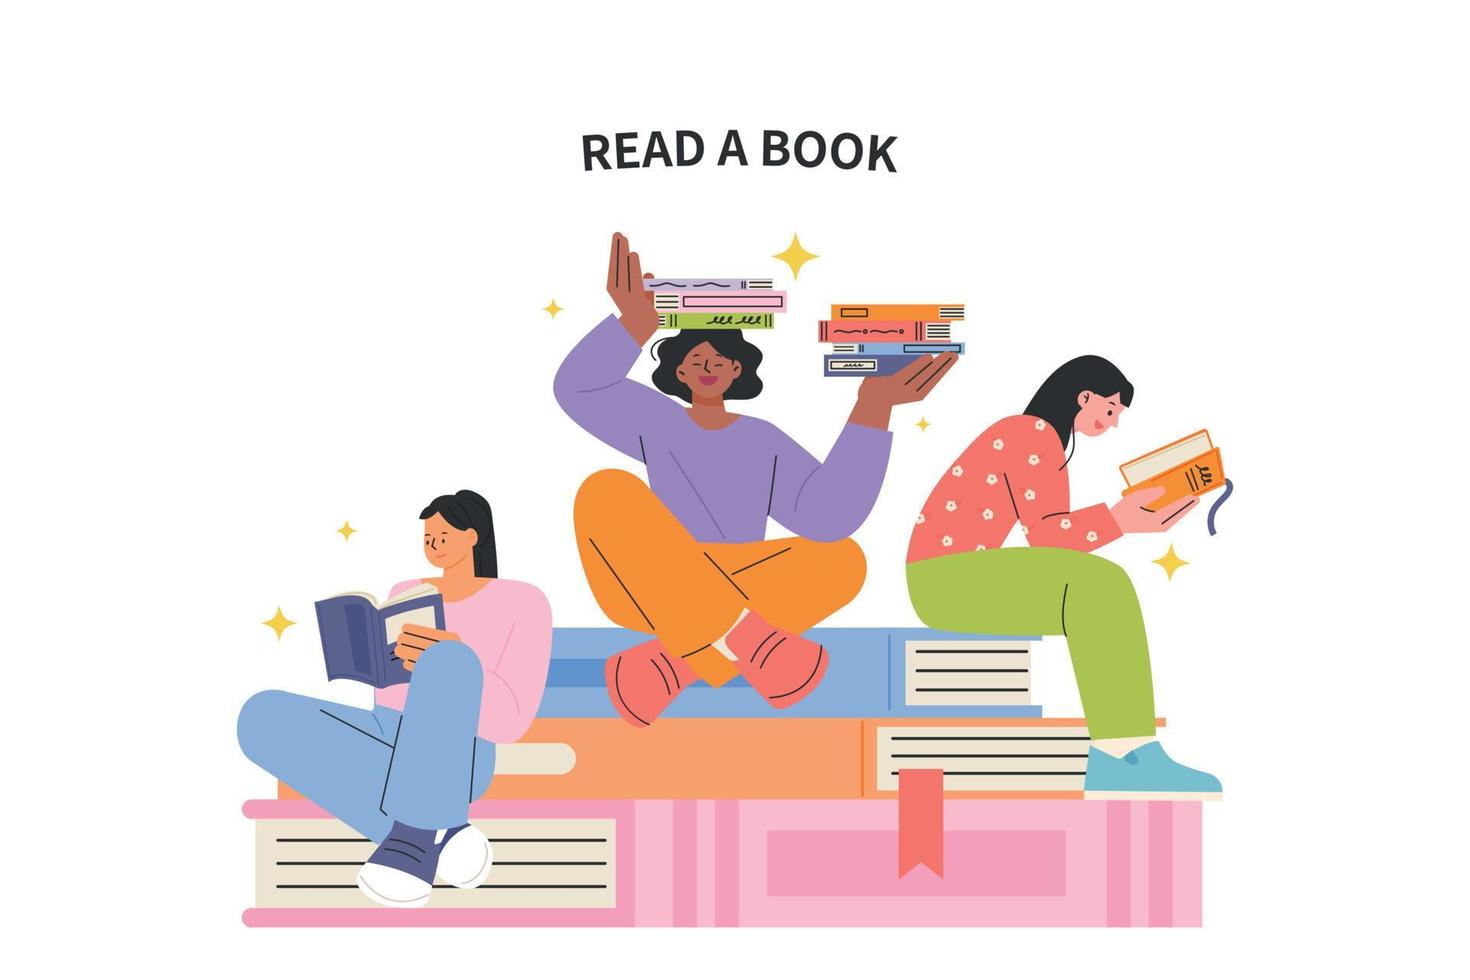 People are sitting and reading books on large piles of books. flat vector illustration.